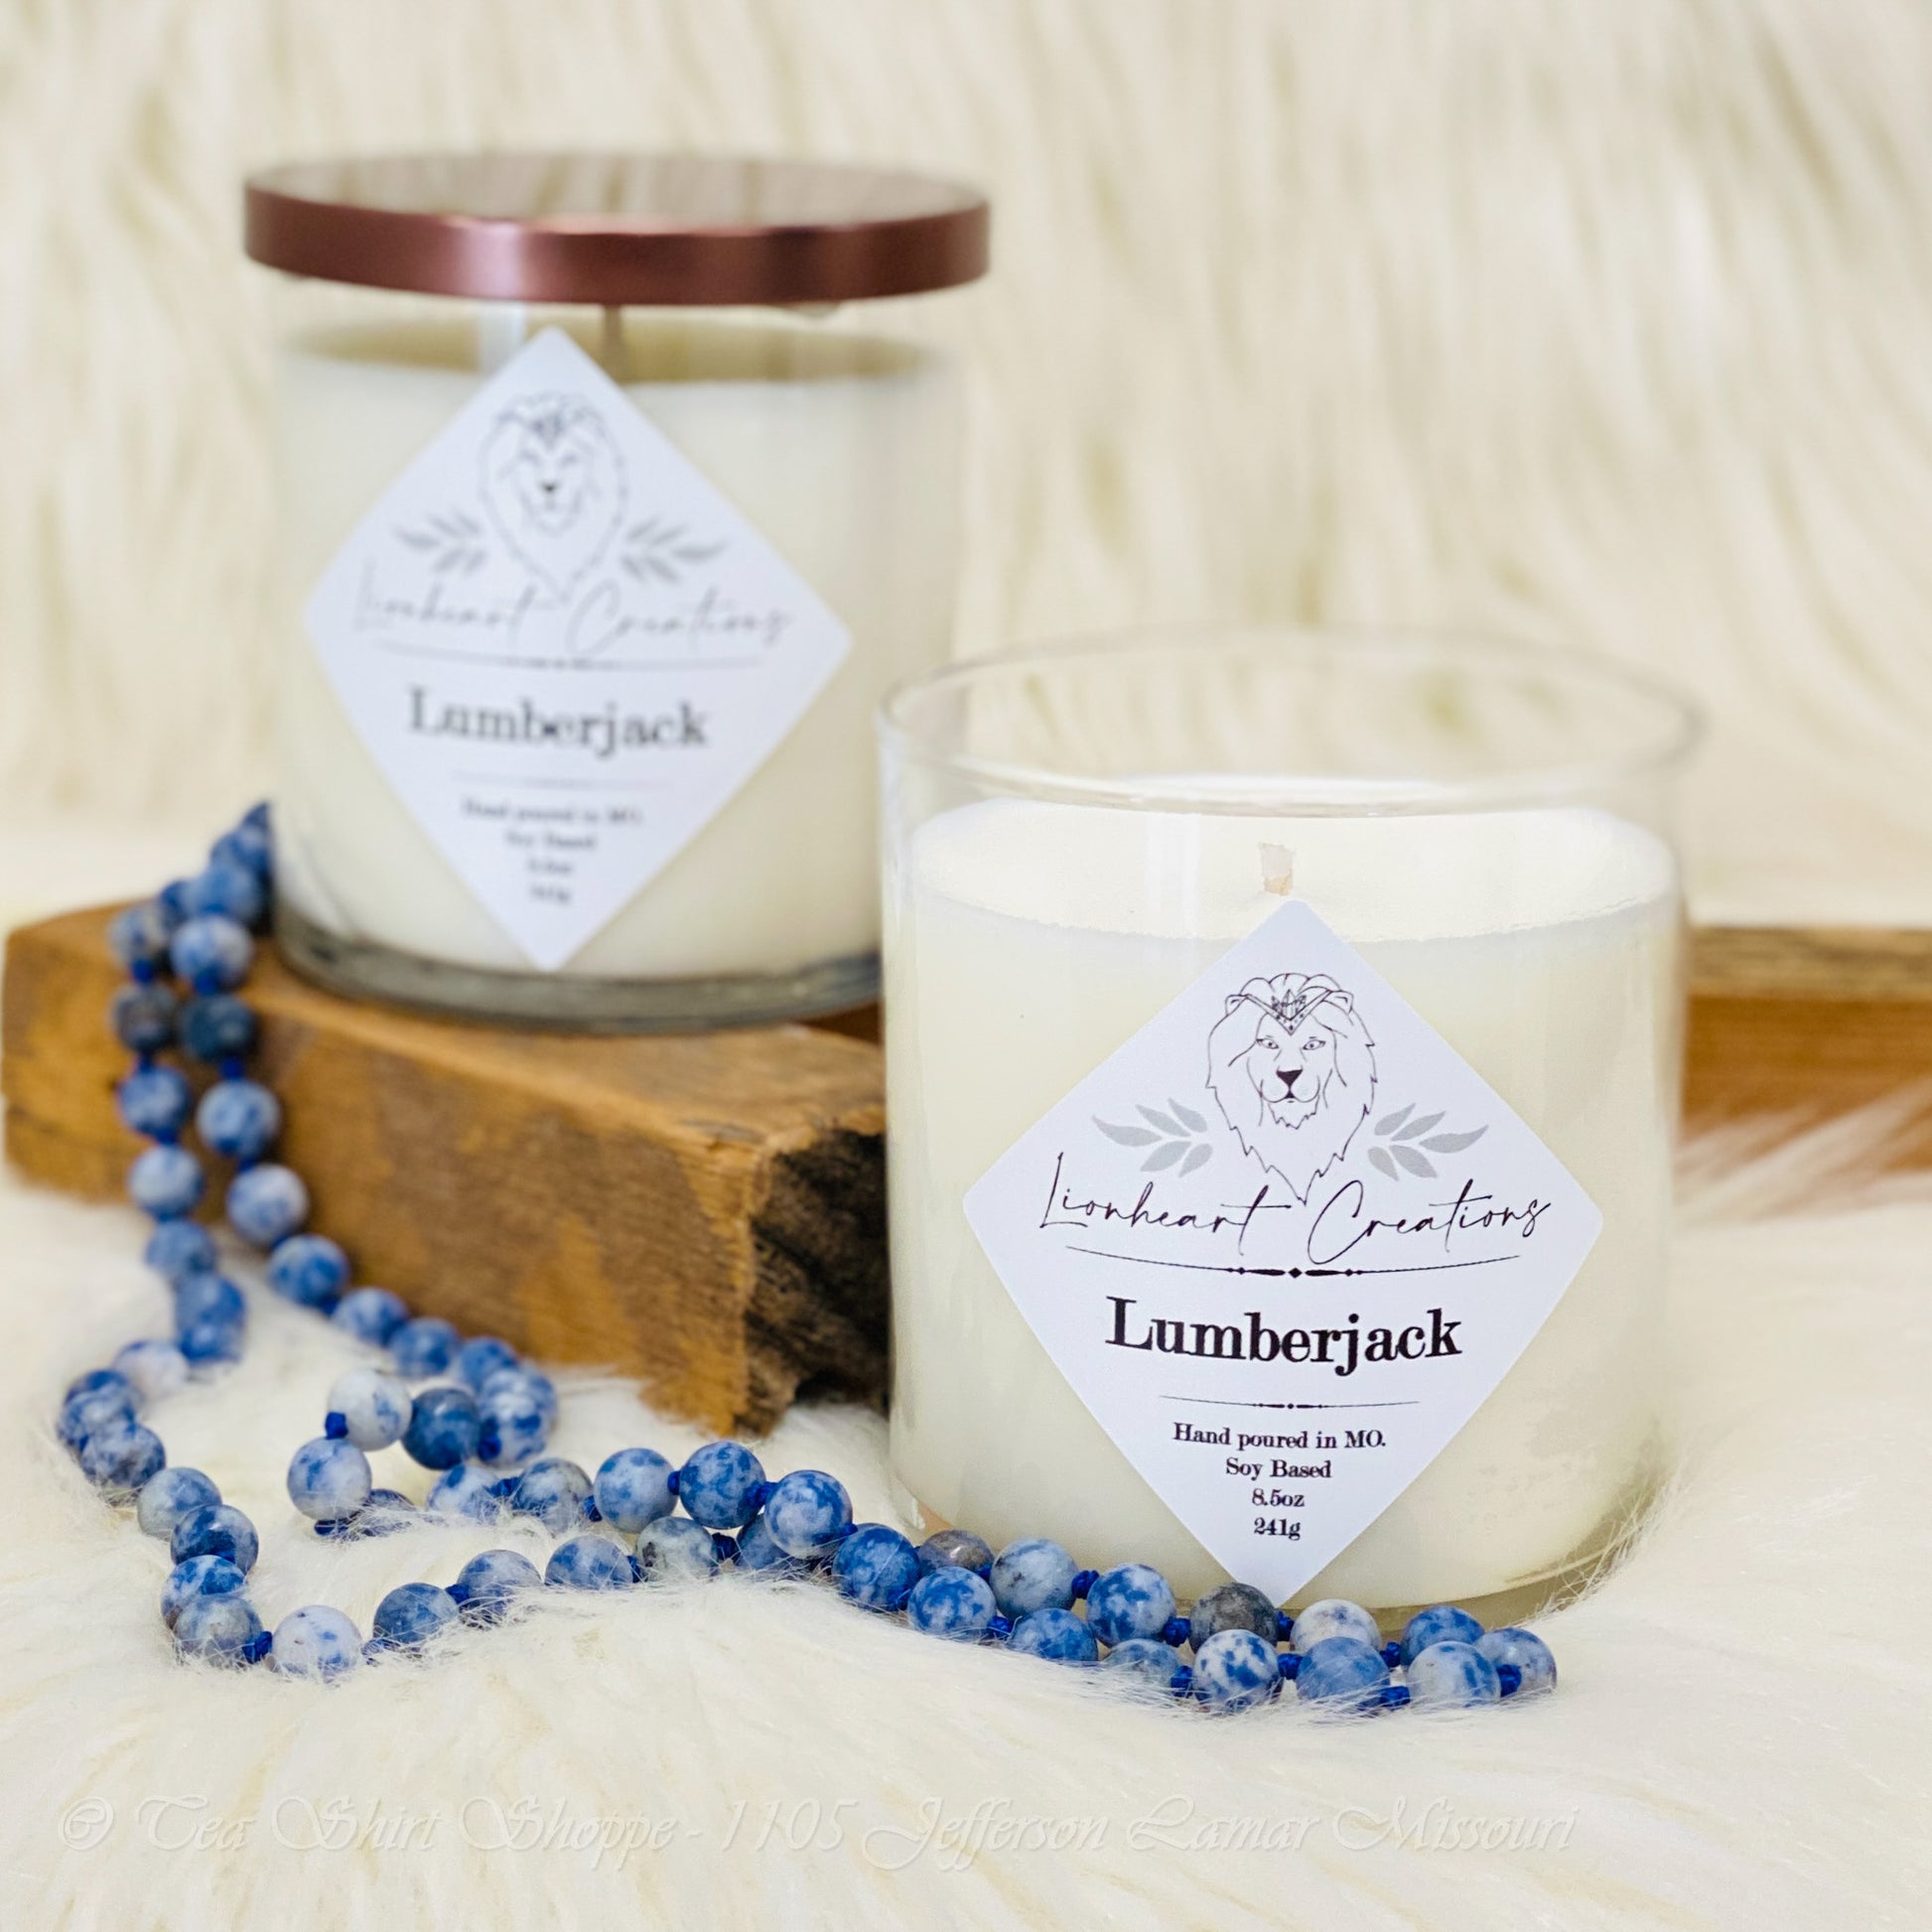 With top notes of cologne and base notes of cedar, sawdust, leather, and pine, you’ll feel like a real lumberjack as soon as you light this candle! Ladies, don’t be scared off by its masculine smell — this candle is sure to bring you the peace and calm of the great outdoors. So sit back, relax, and let Lumberjack do its job!